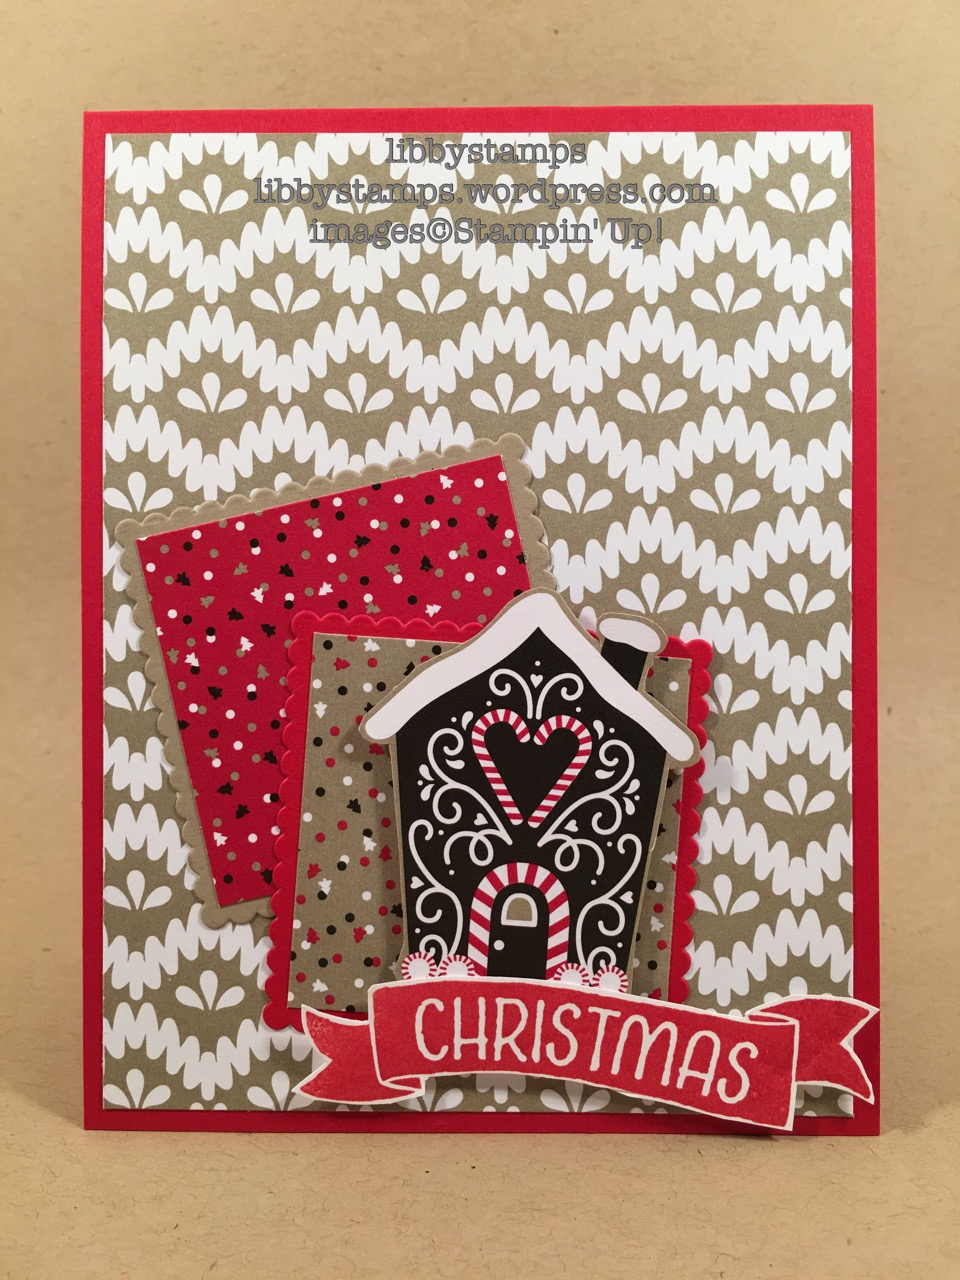 libbystamps, stampin up, Time of Year, Layering Squares Framelits, Candy Cane Lane DSP, CCMC 